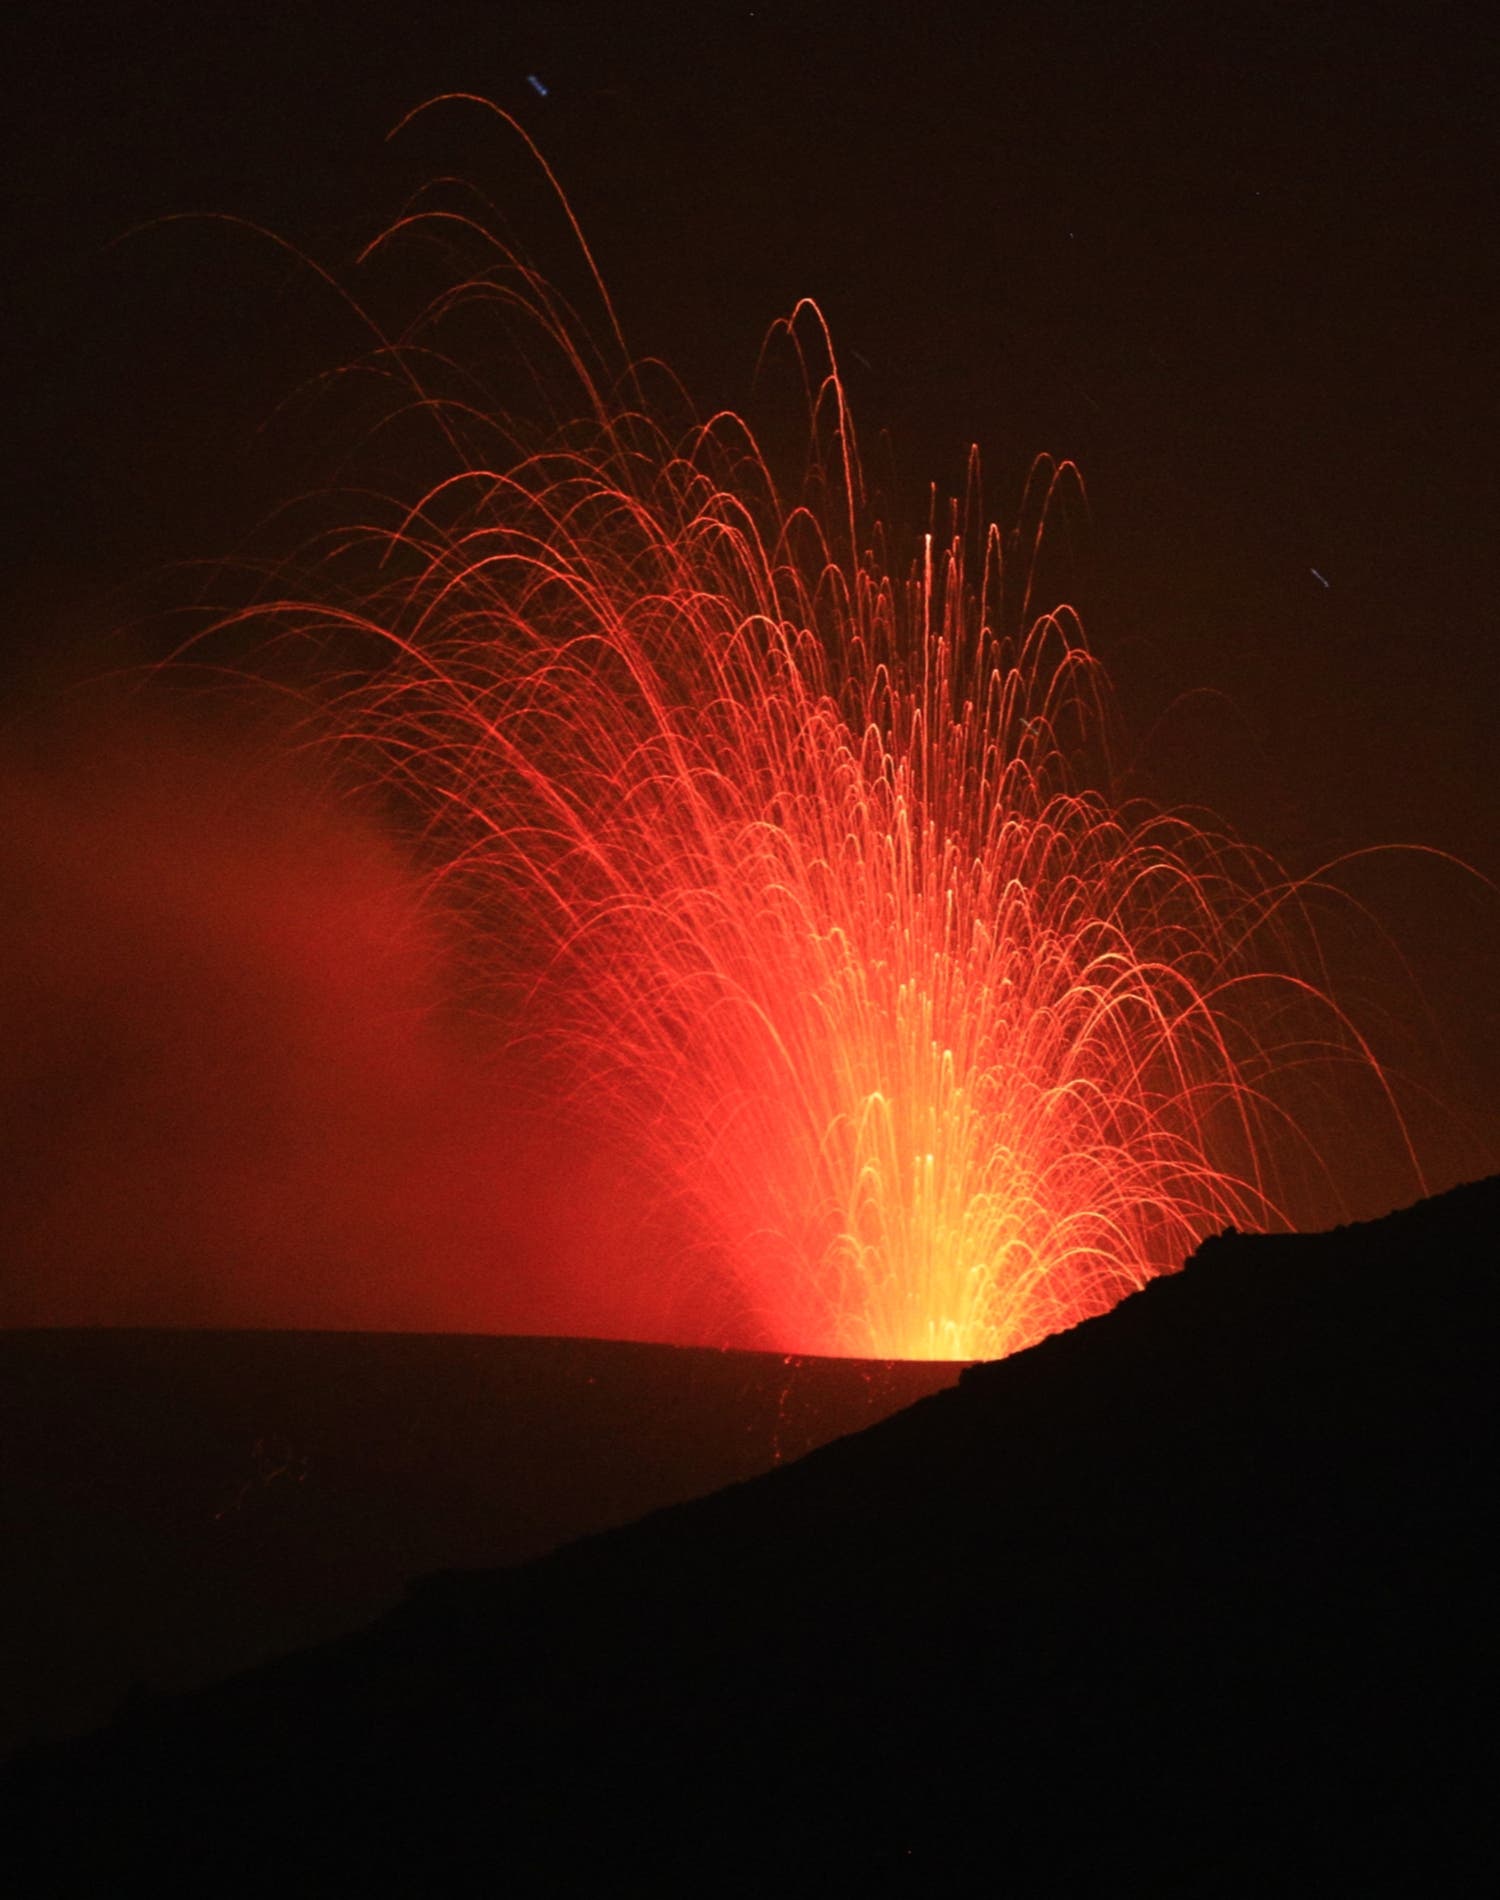 New Eruption with gas emission and light reflection volcano Etna - Sicily 